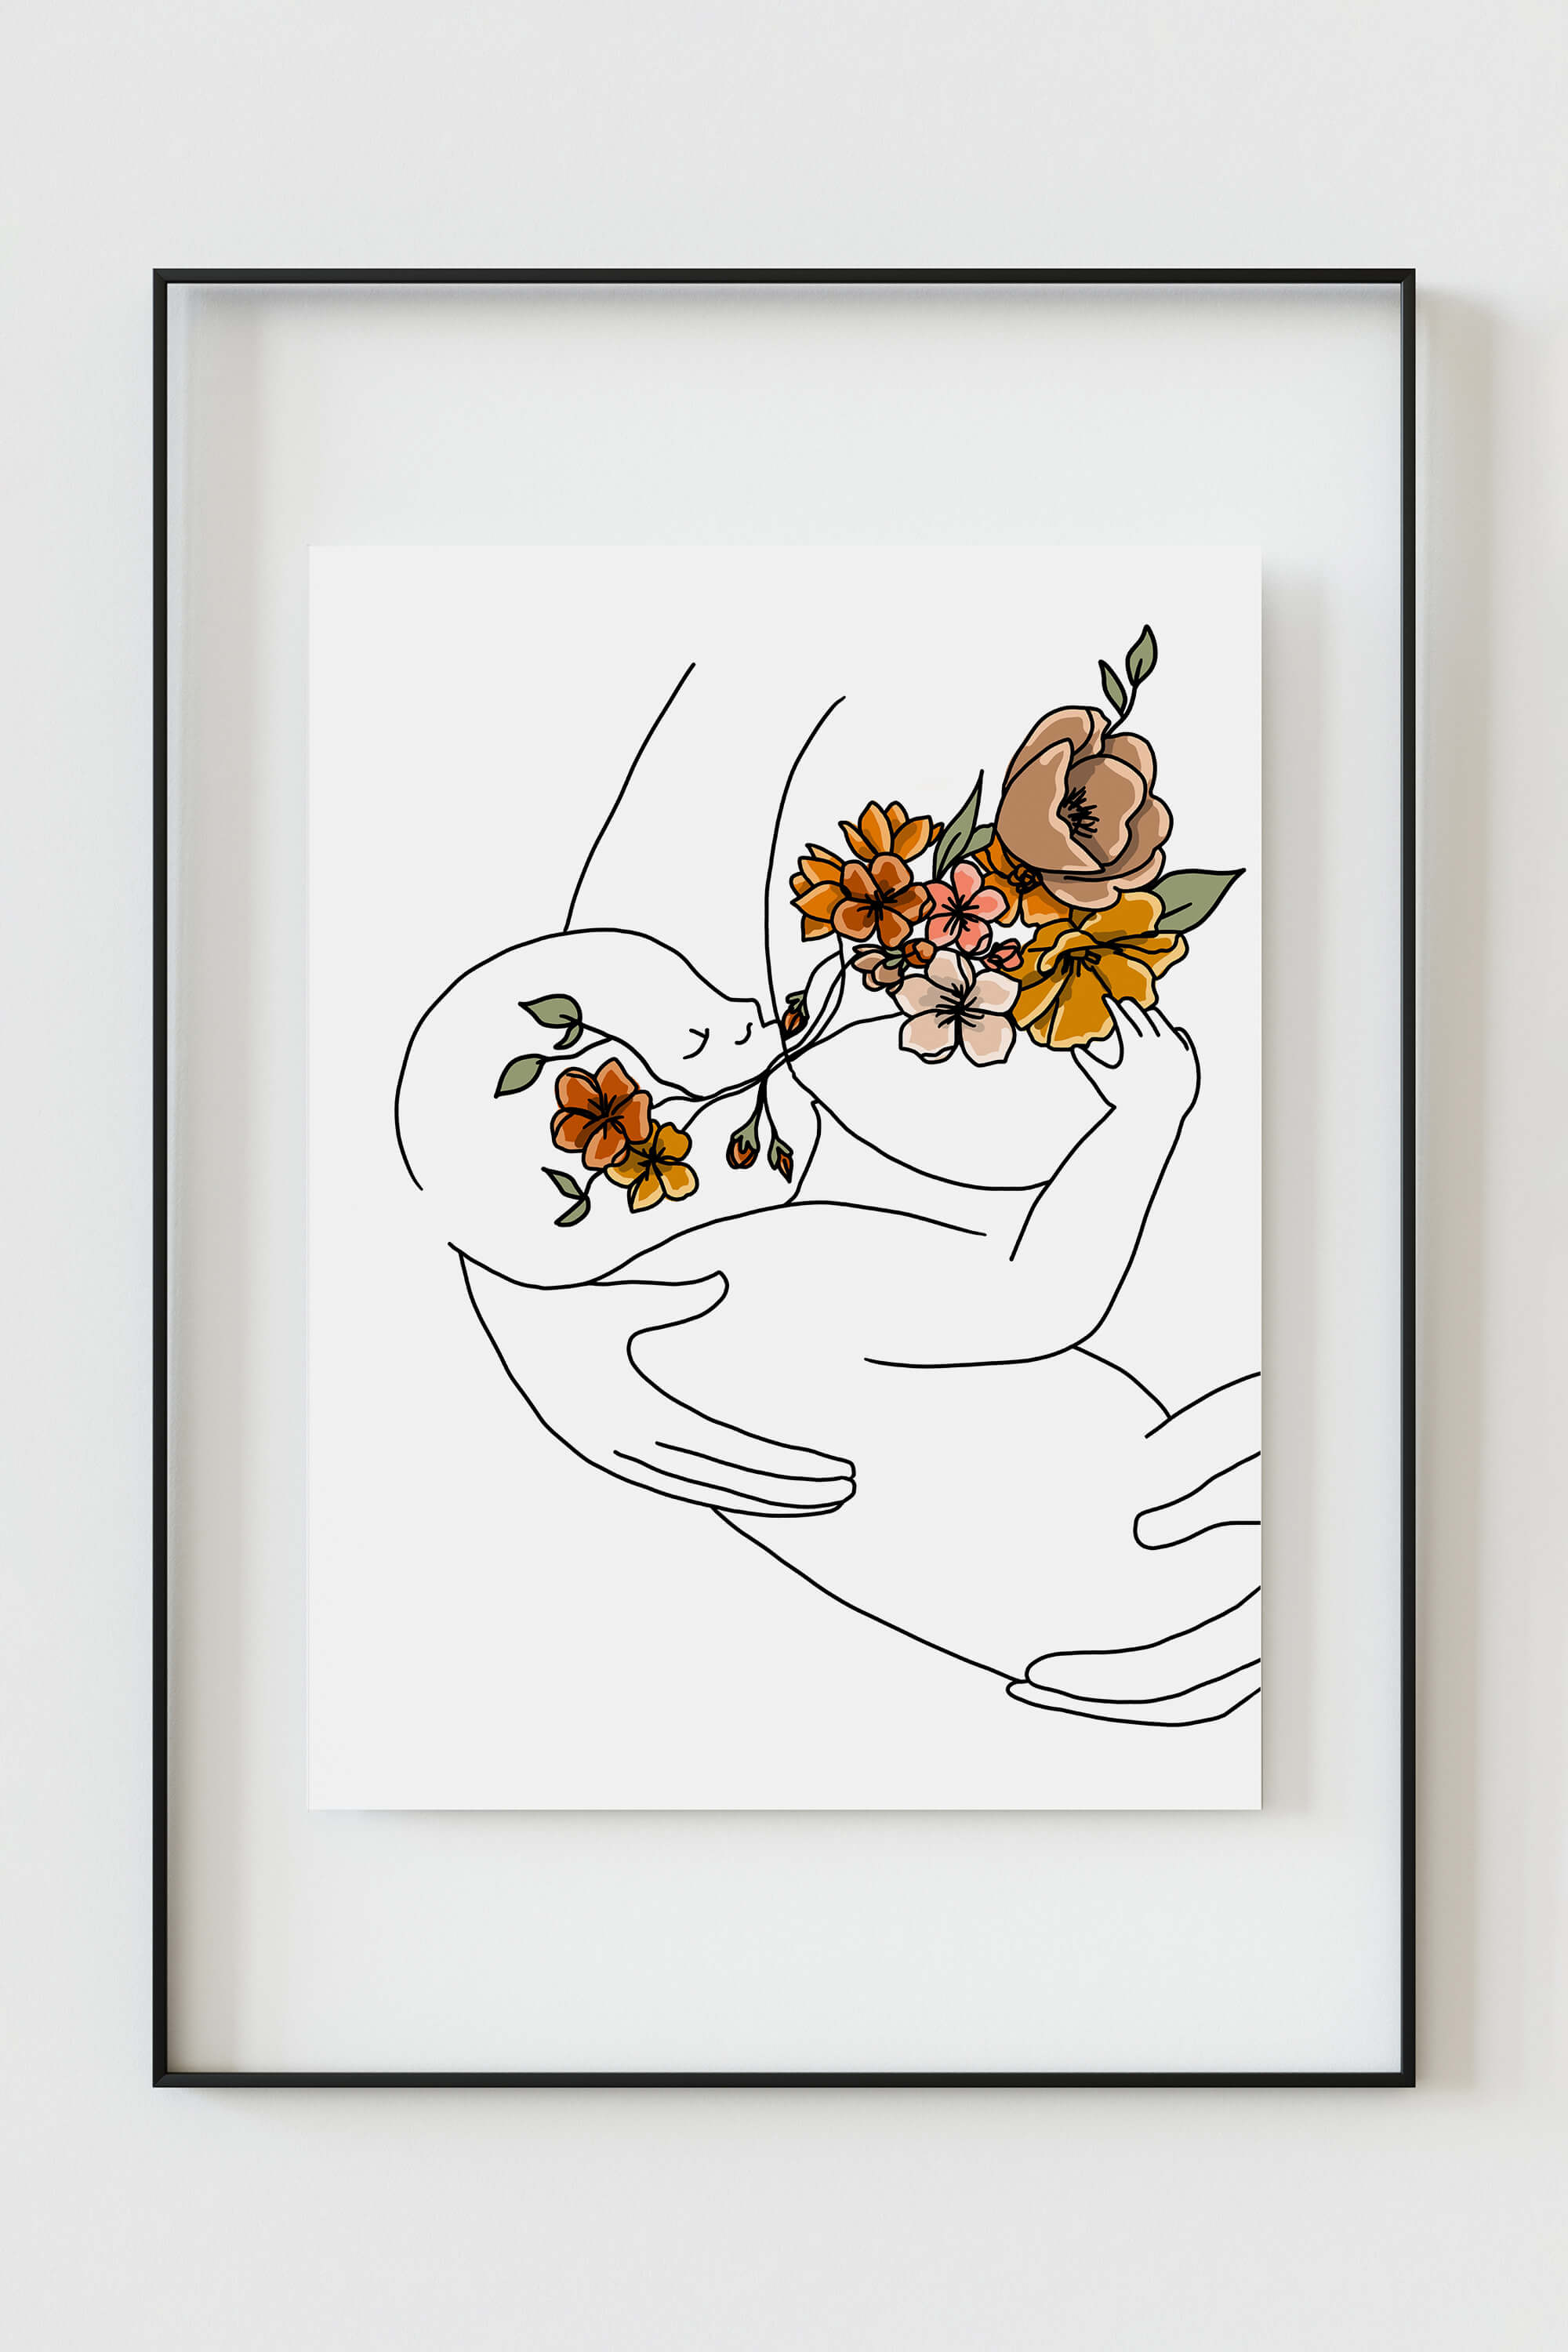 Artistic Floral Breastfeeding Theme Artwork, ideal for midwife clinic decor or as a professional appreciation gift.